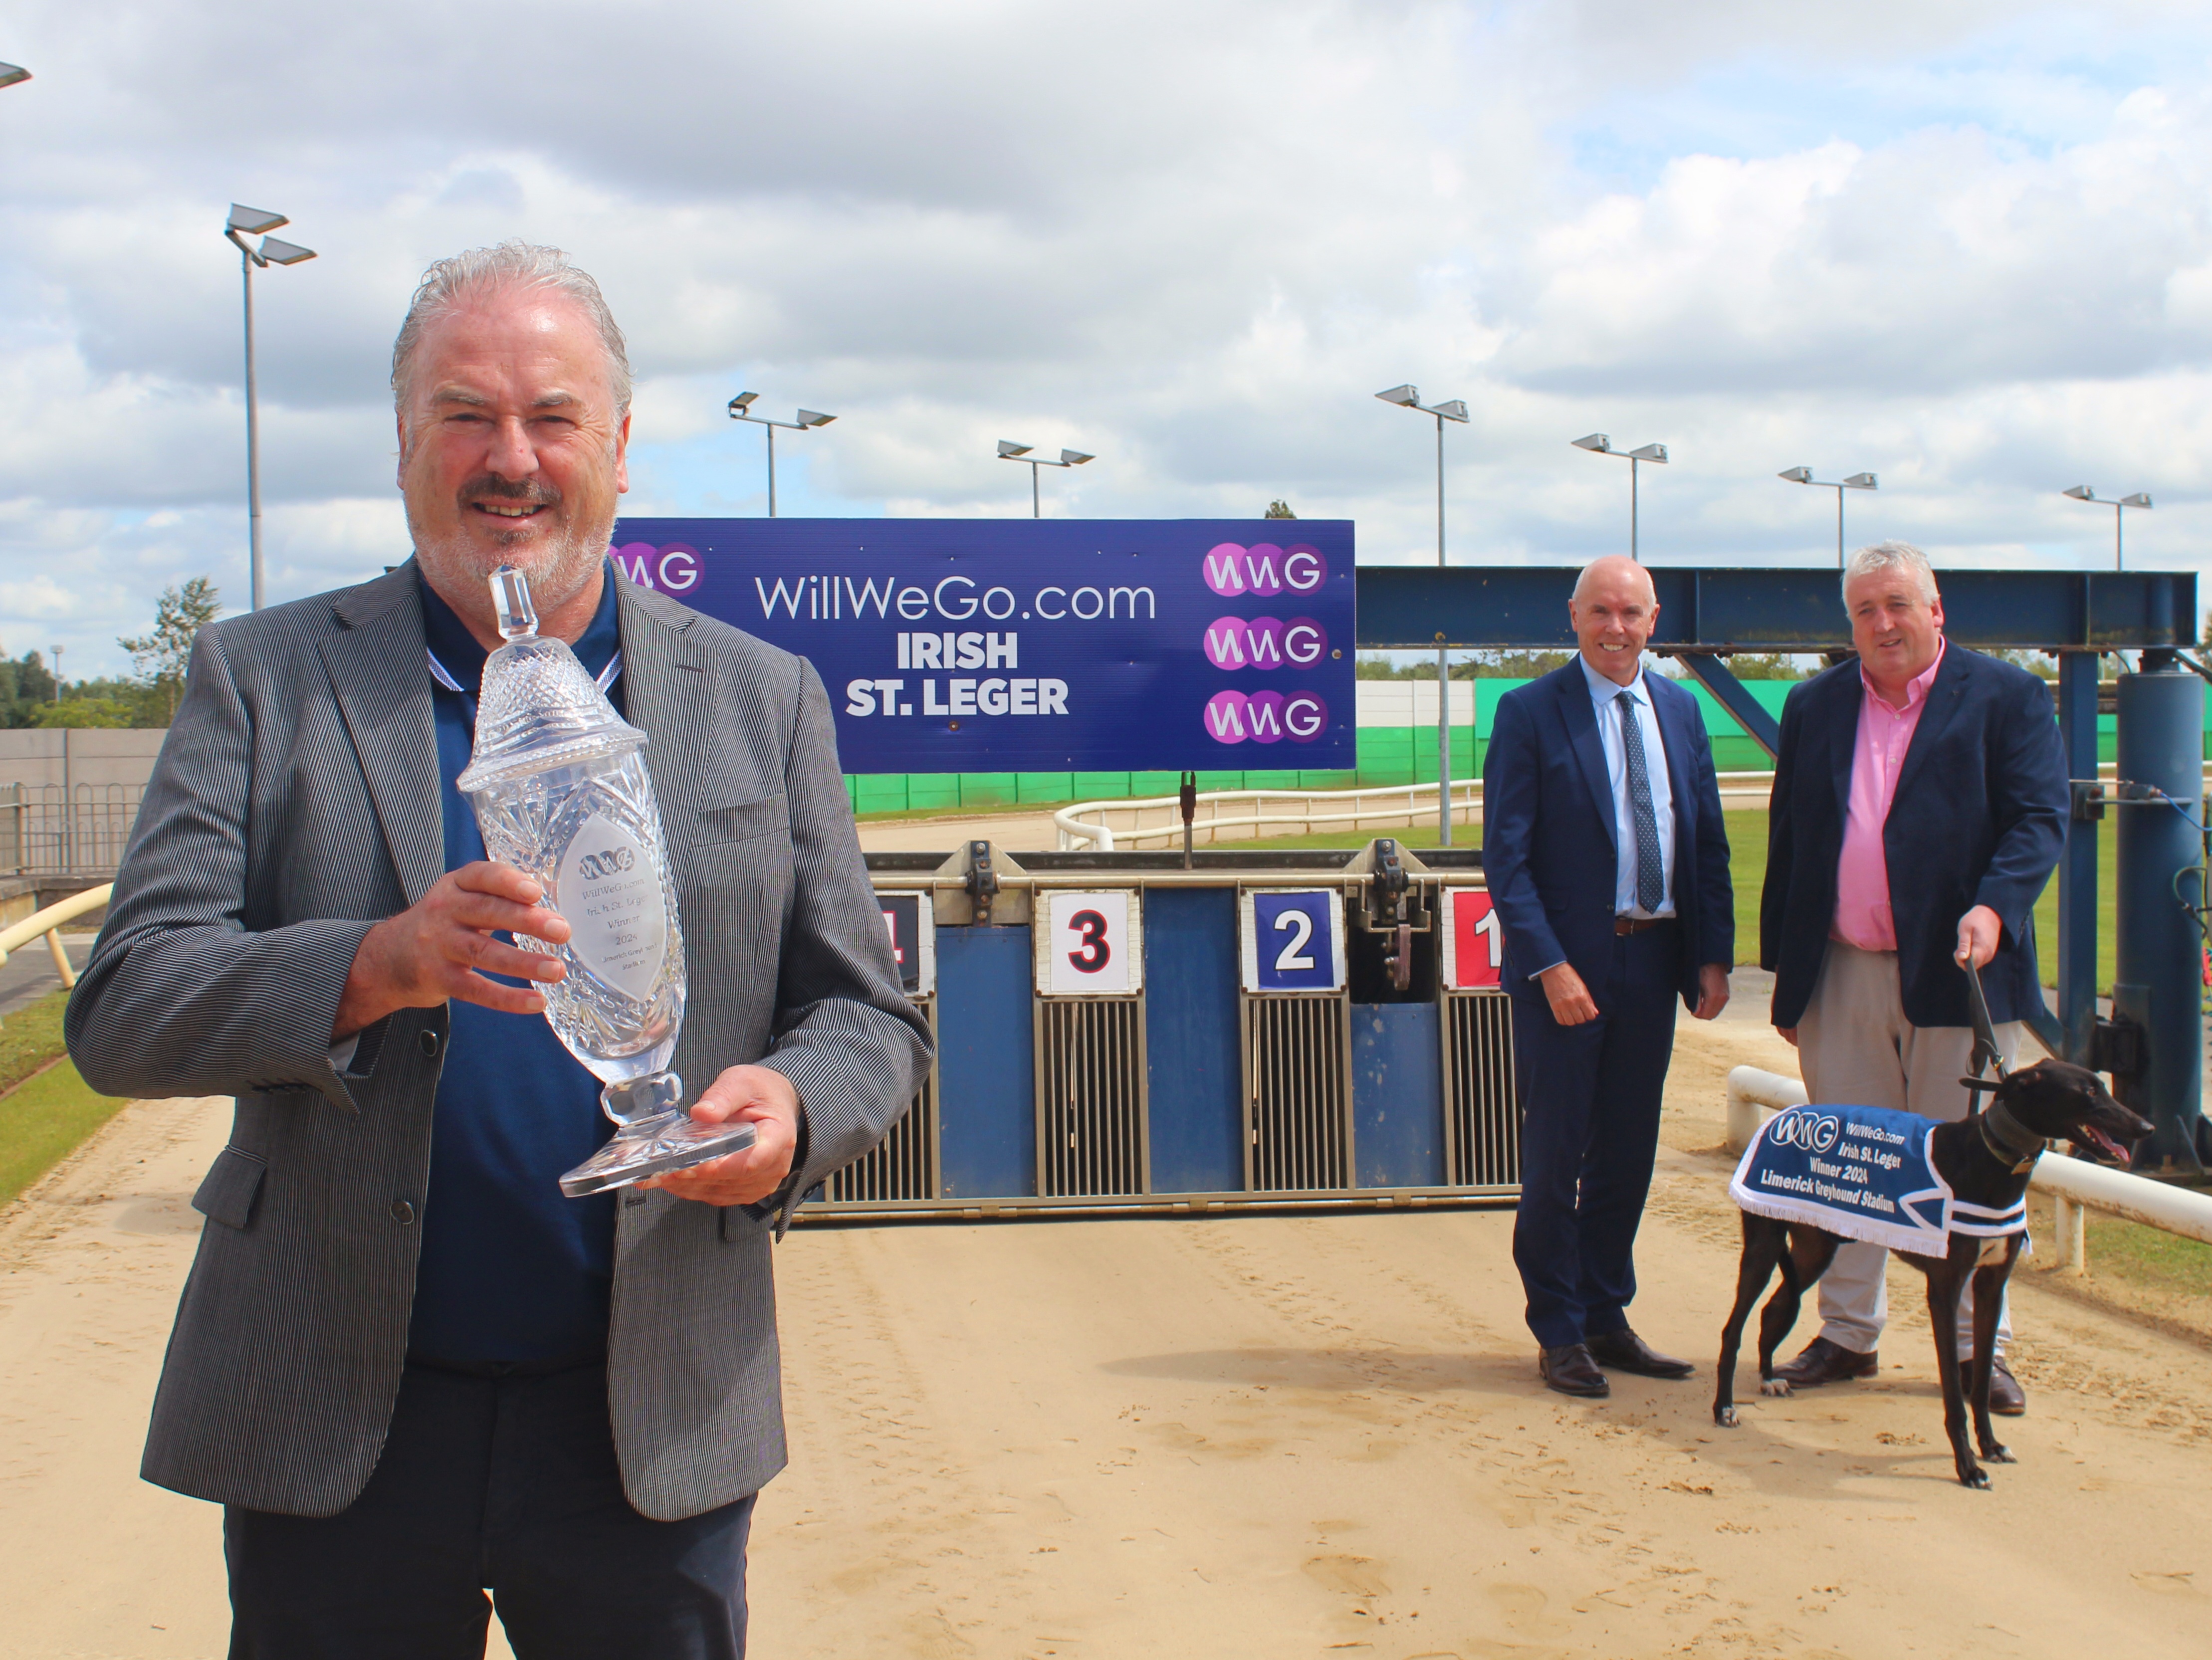 Ray Quinn, representing the sponsor, holding the trophy for this year’s WillWeGo.com Irish St. Leger at Limerick Greyhound Stadium with Tim Lucey, CEO of Greyhound Racing Ireland, and Jody Thompson, Racing Manager, with Sombra the greyhound.